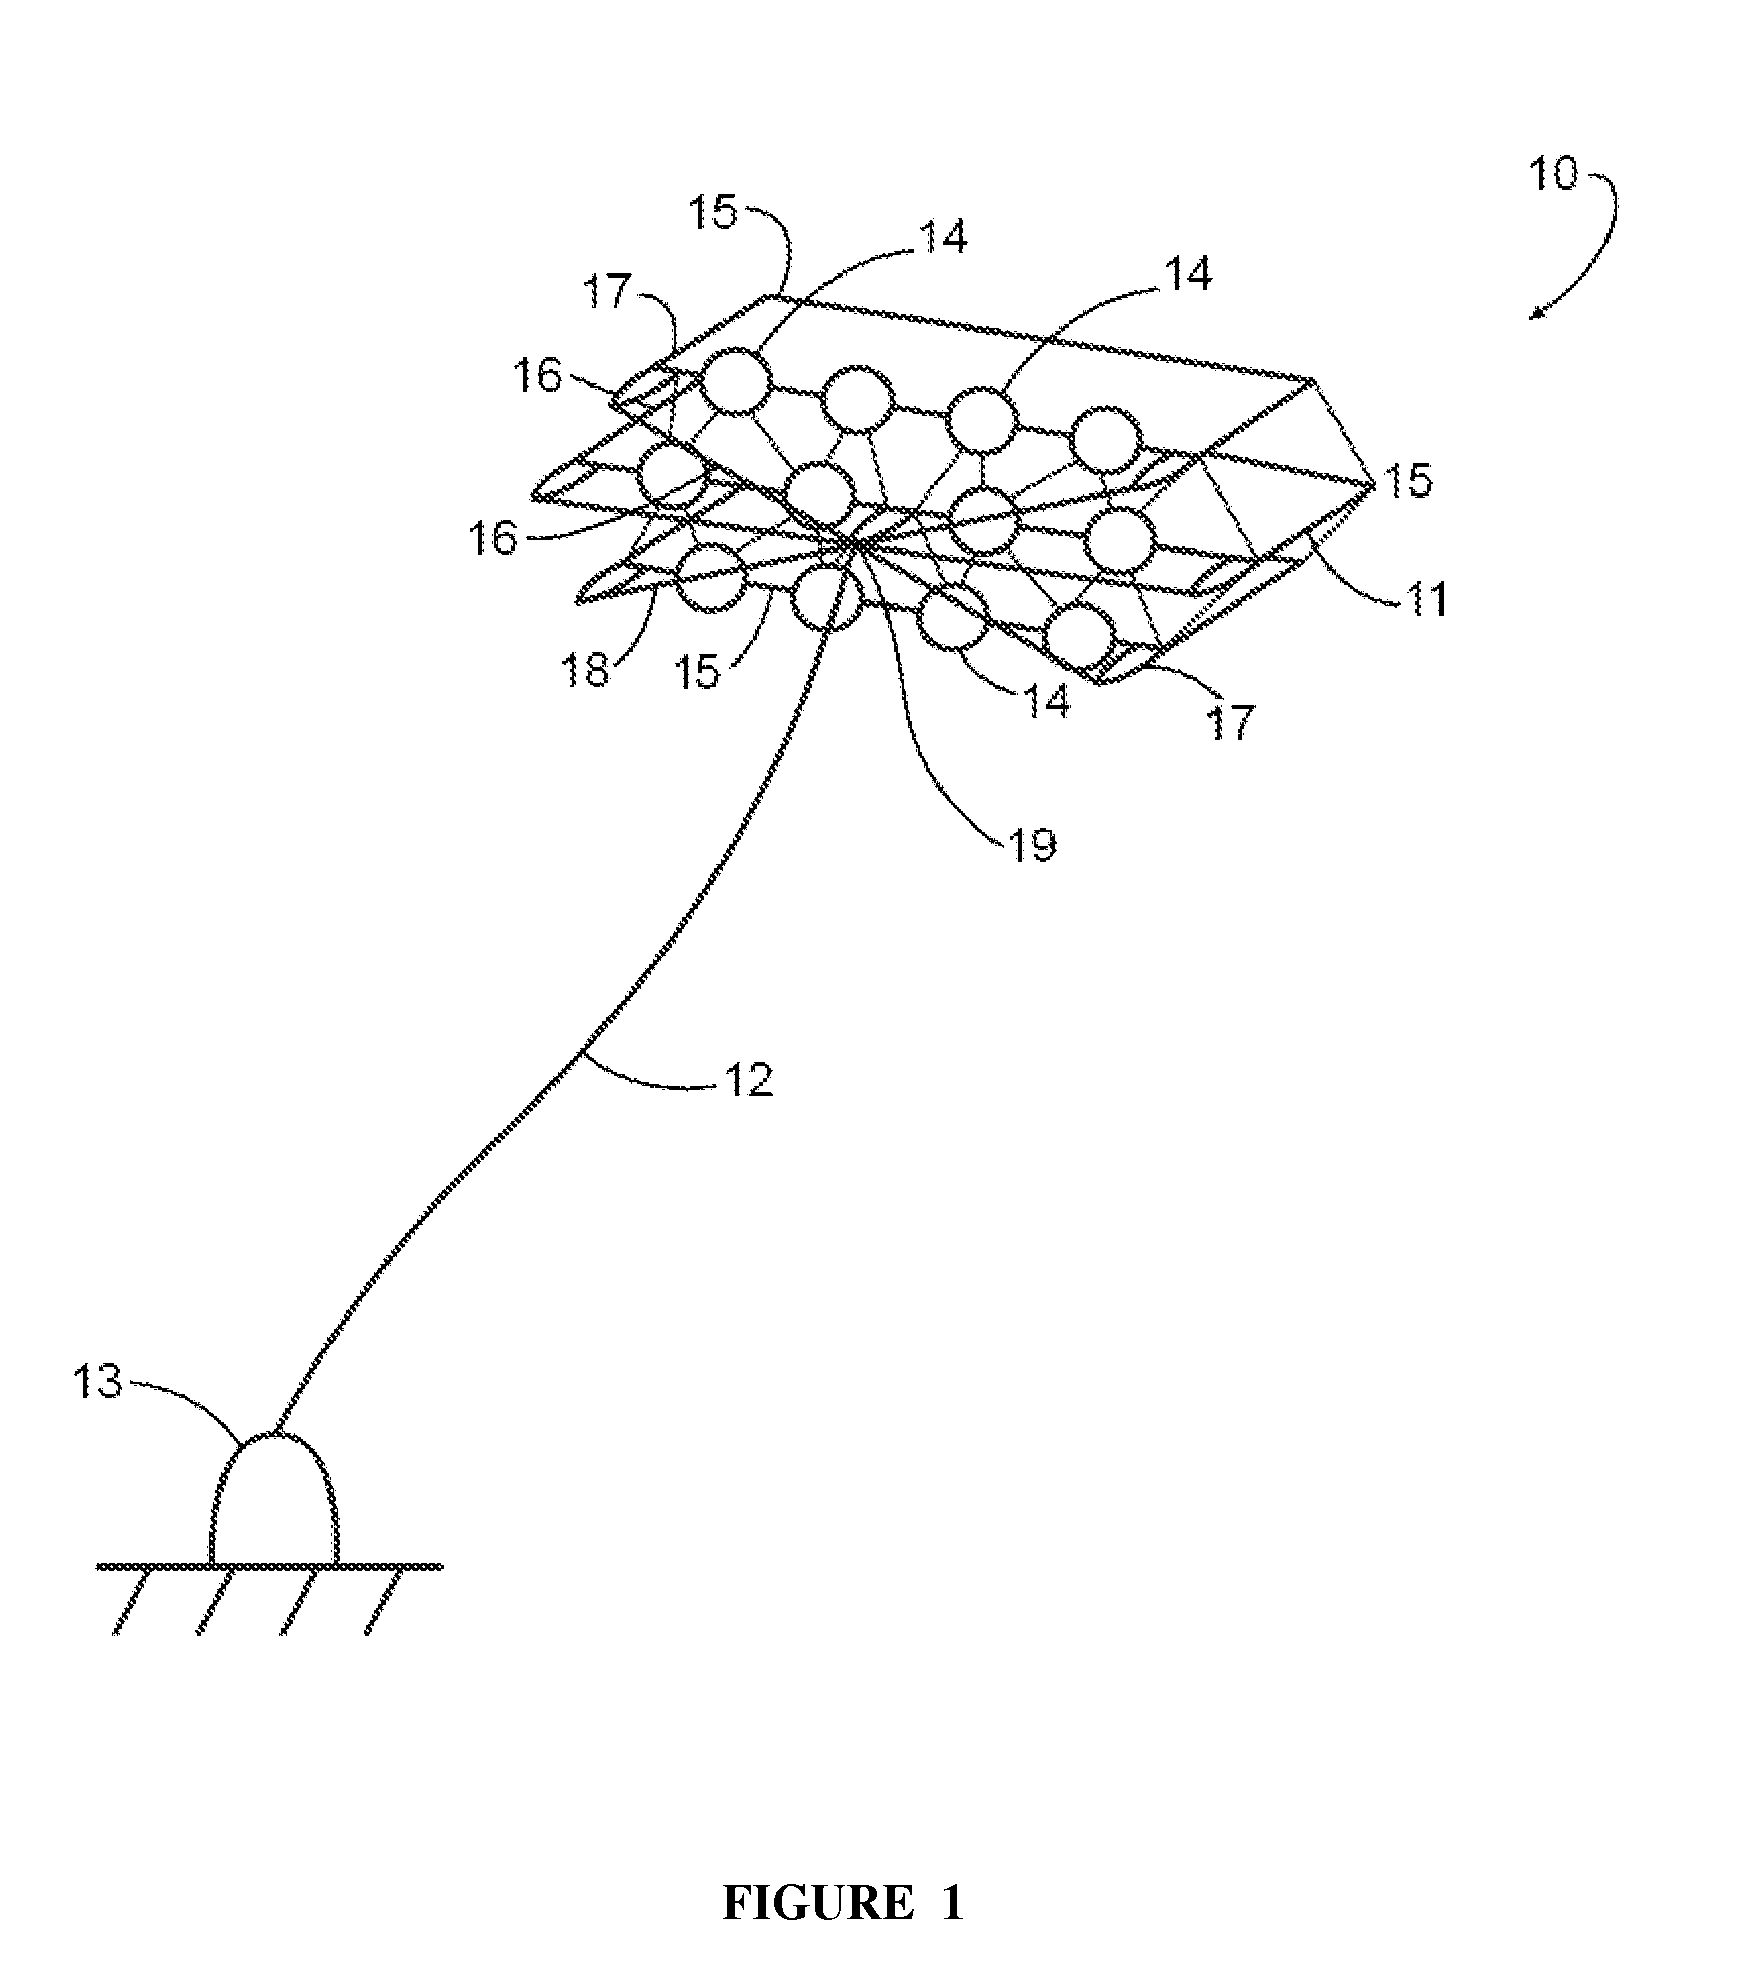 Airborne Power Generation System With Modular Electrical Elements